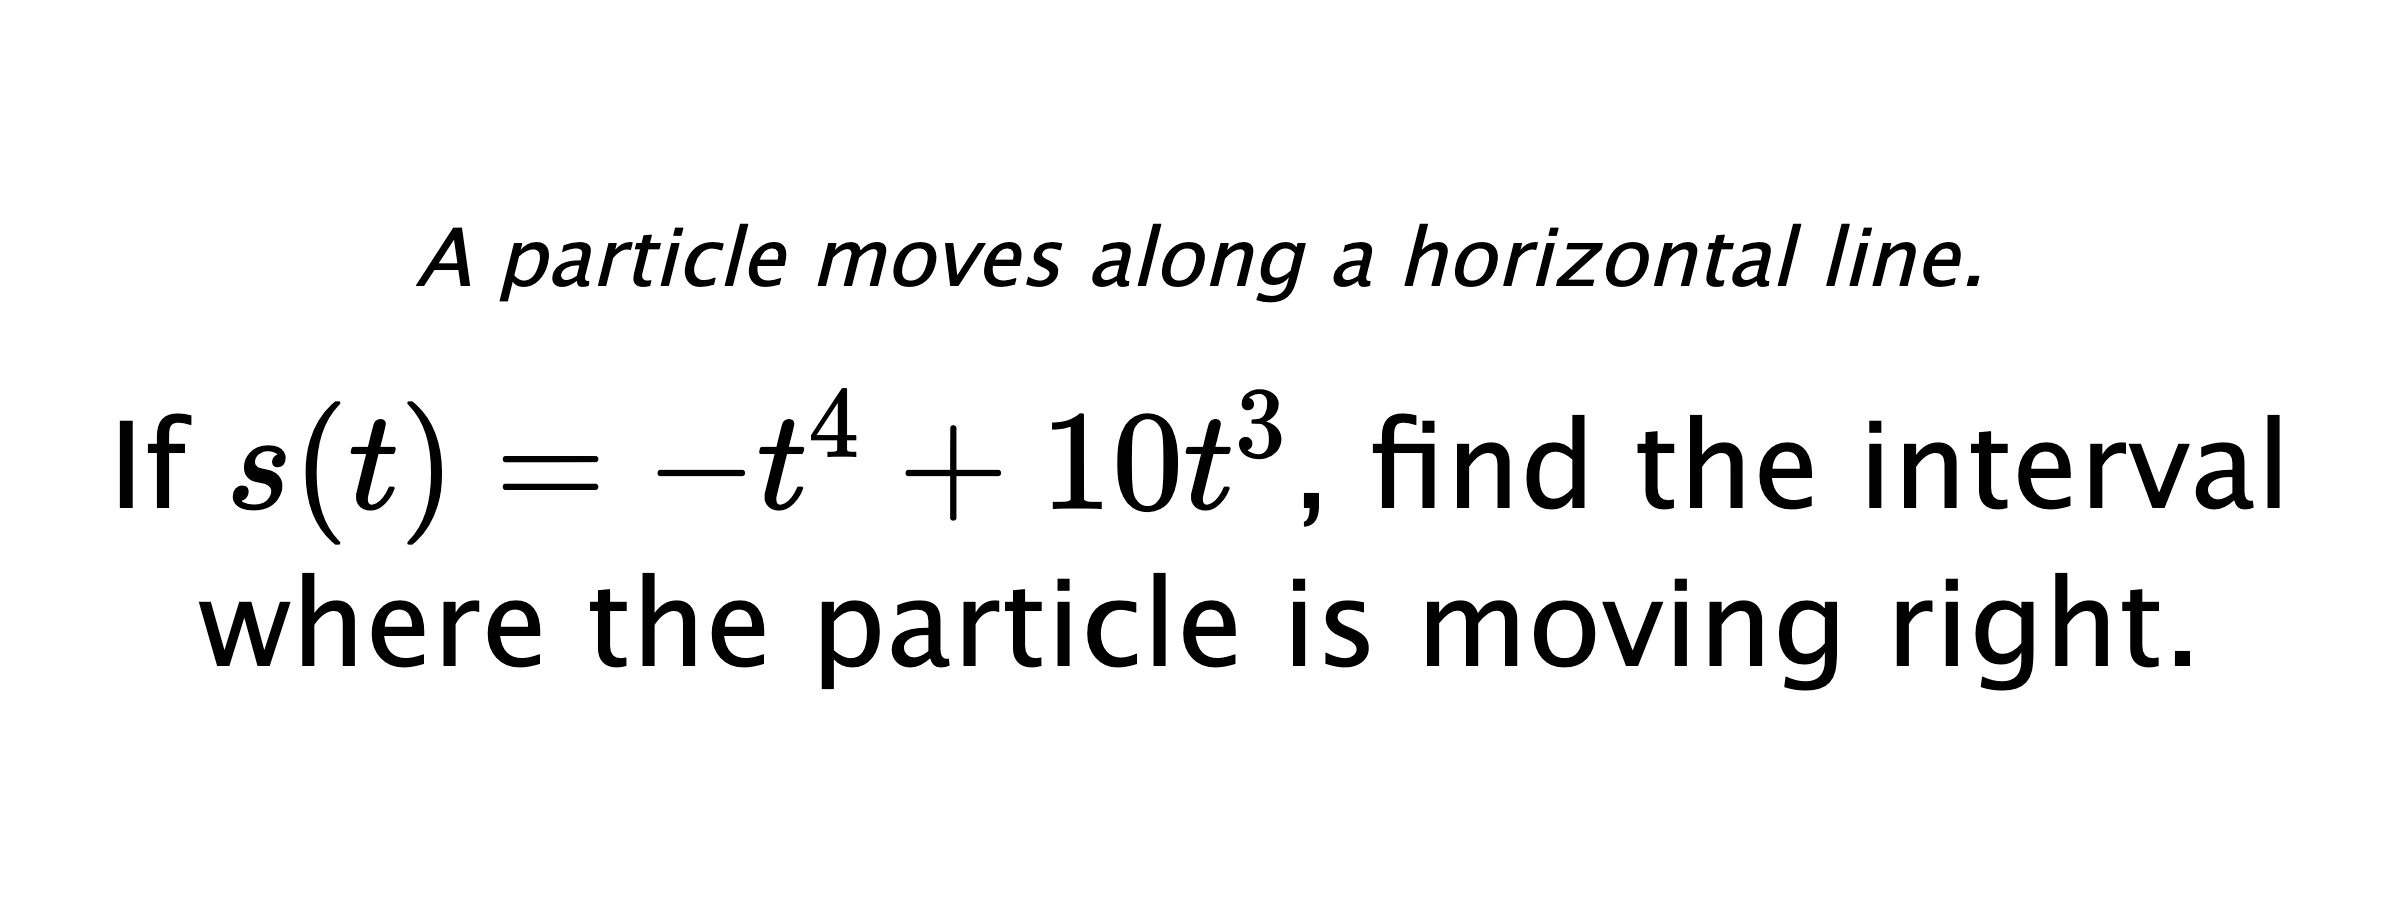 A particle moves along a horizontal line. If $ s(t)=-t^4+10t^3 $, find the interval where the particle is moving right.